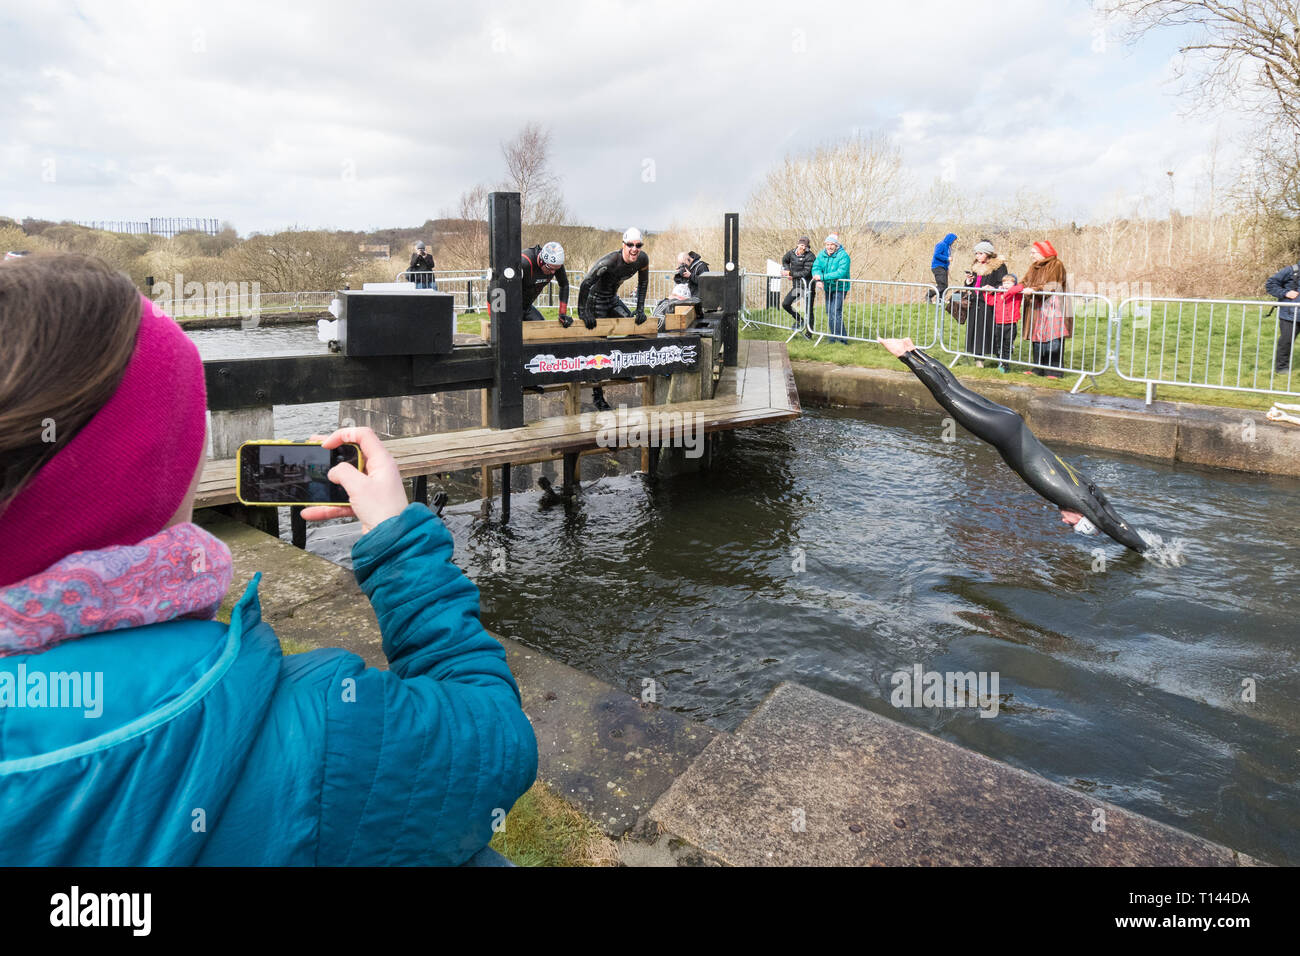 Maryhill, Glasgow, Scotland, UK - 23 March 2019: UK weather - determined competitors braving 8 degree water temperatures at the Red Bull Neptune Steps swim/climb adventure endurance race at Maryhill Locks, Glasgow.  The annual extreme event involves swimming 400m of cold canal water and climbing 18 metres over 7 canal lock gate obstacles Stock Photo